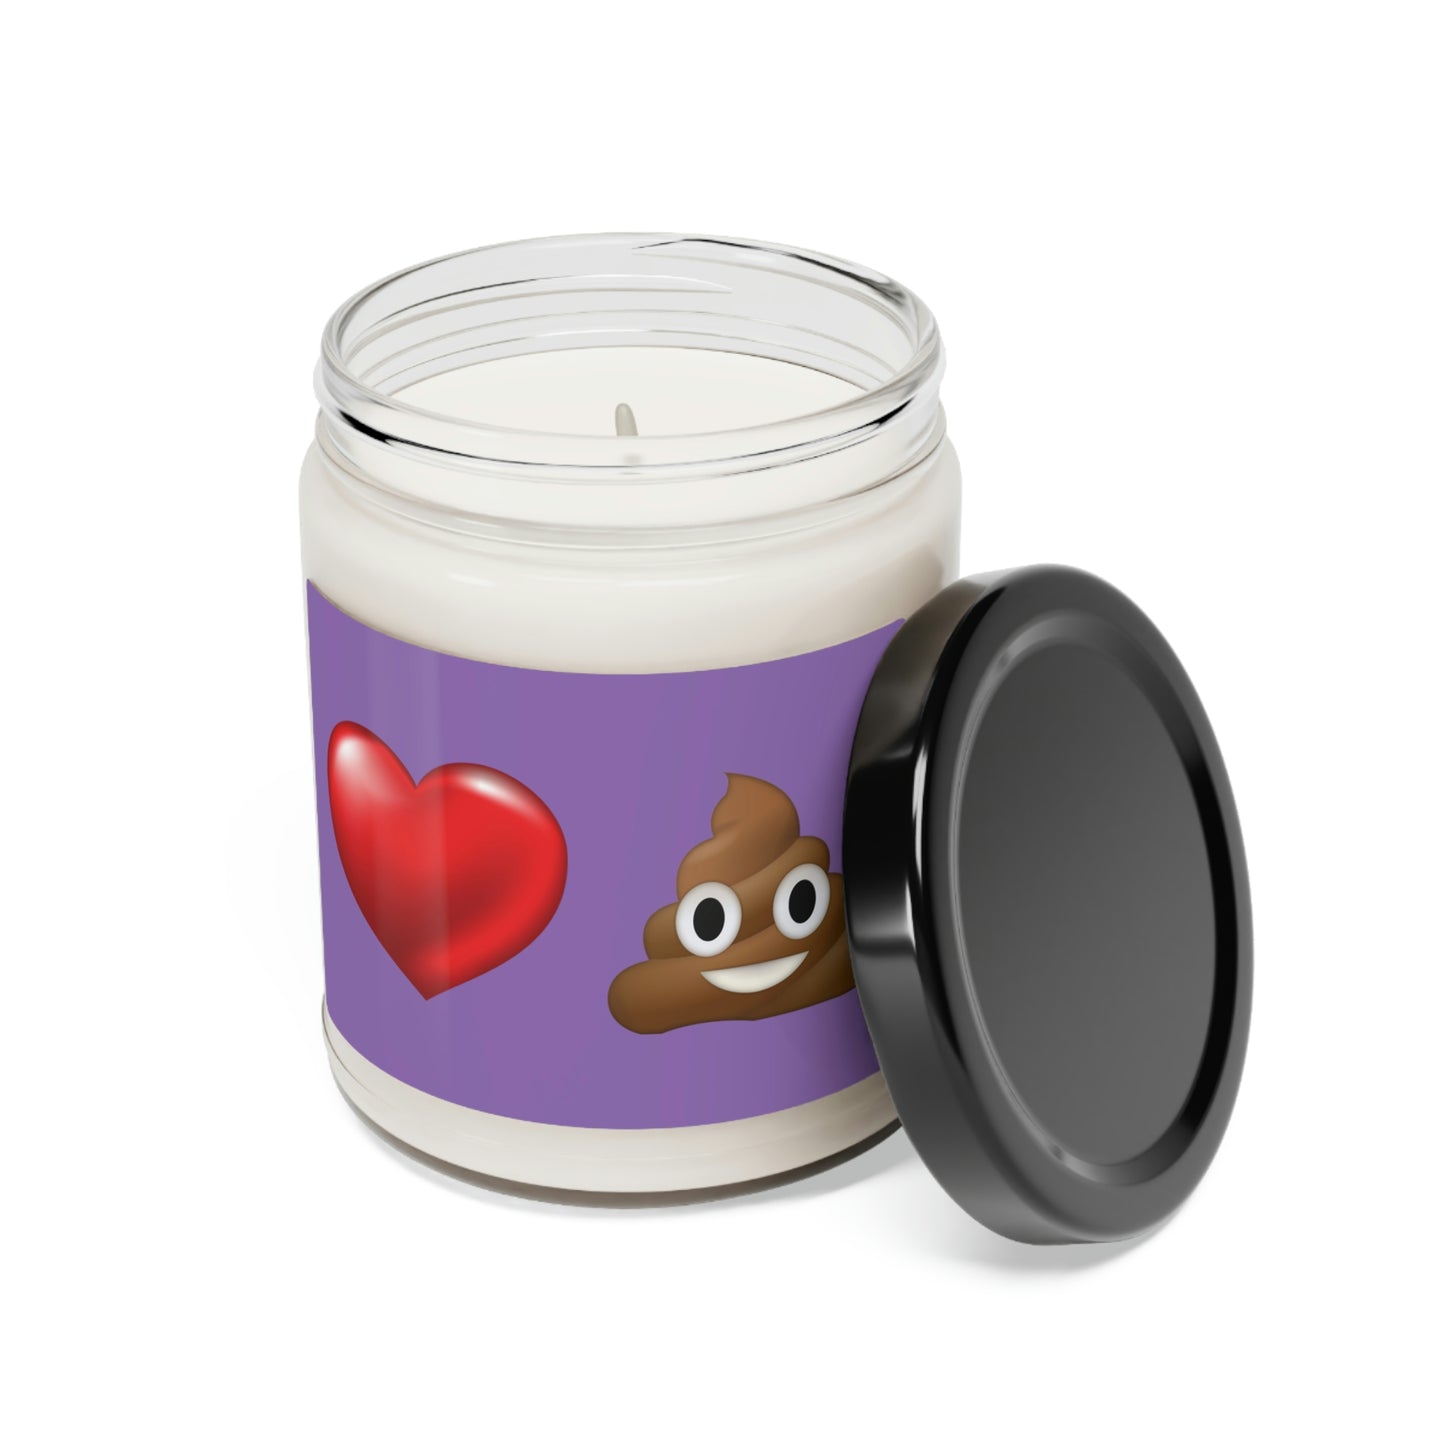 Love & Shit Sexy Time Scented Soy Candle, 9oz